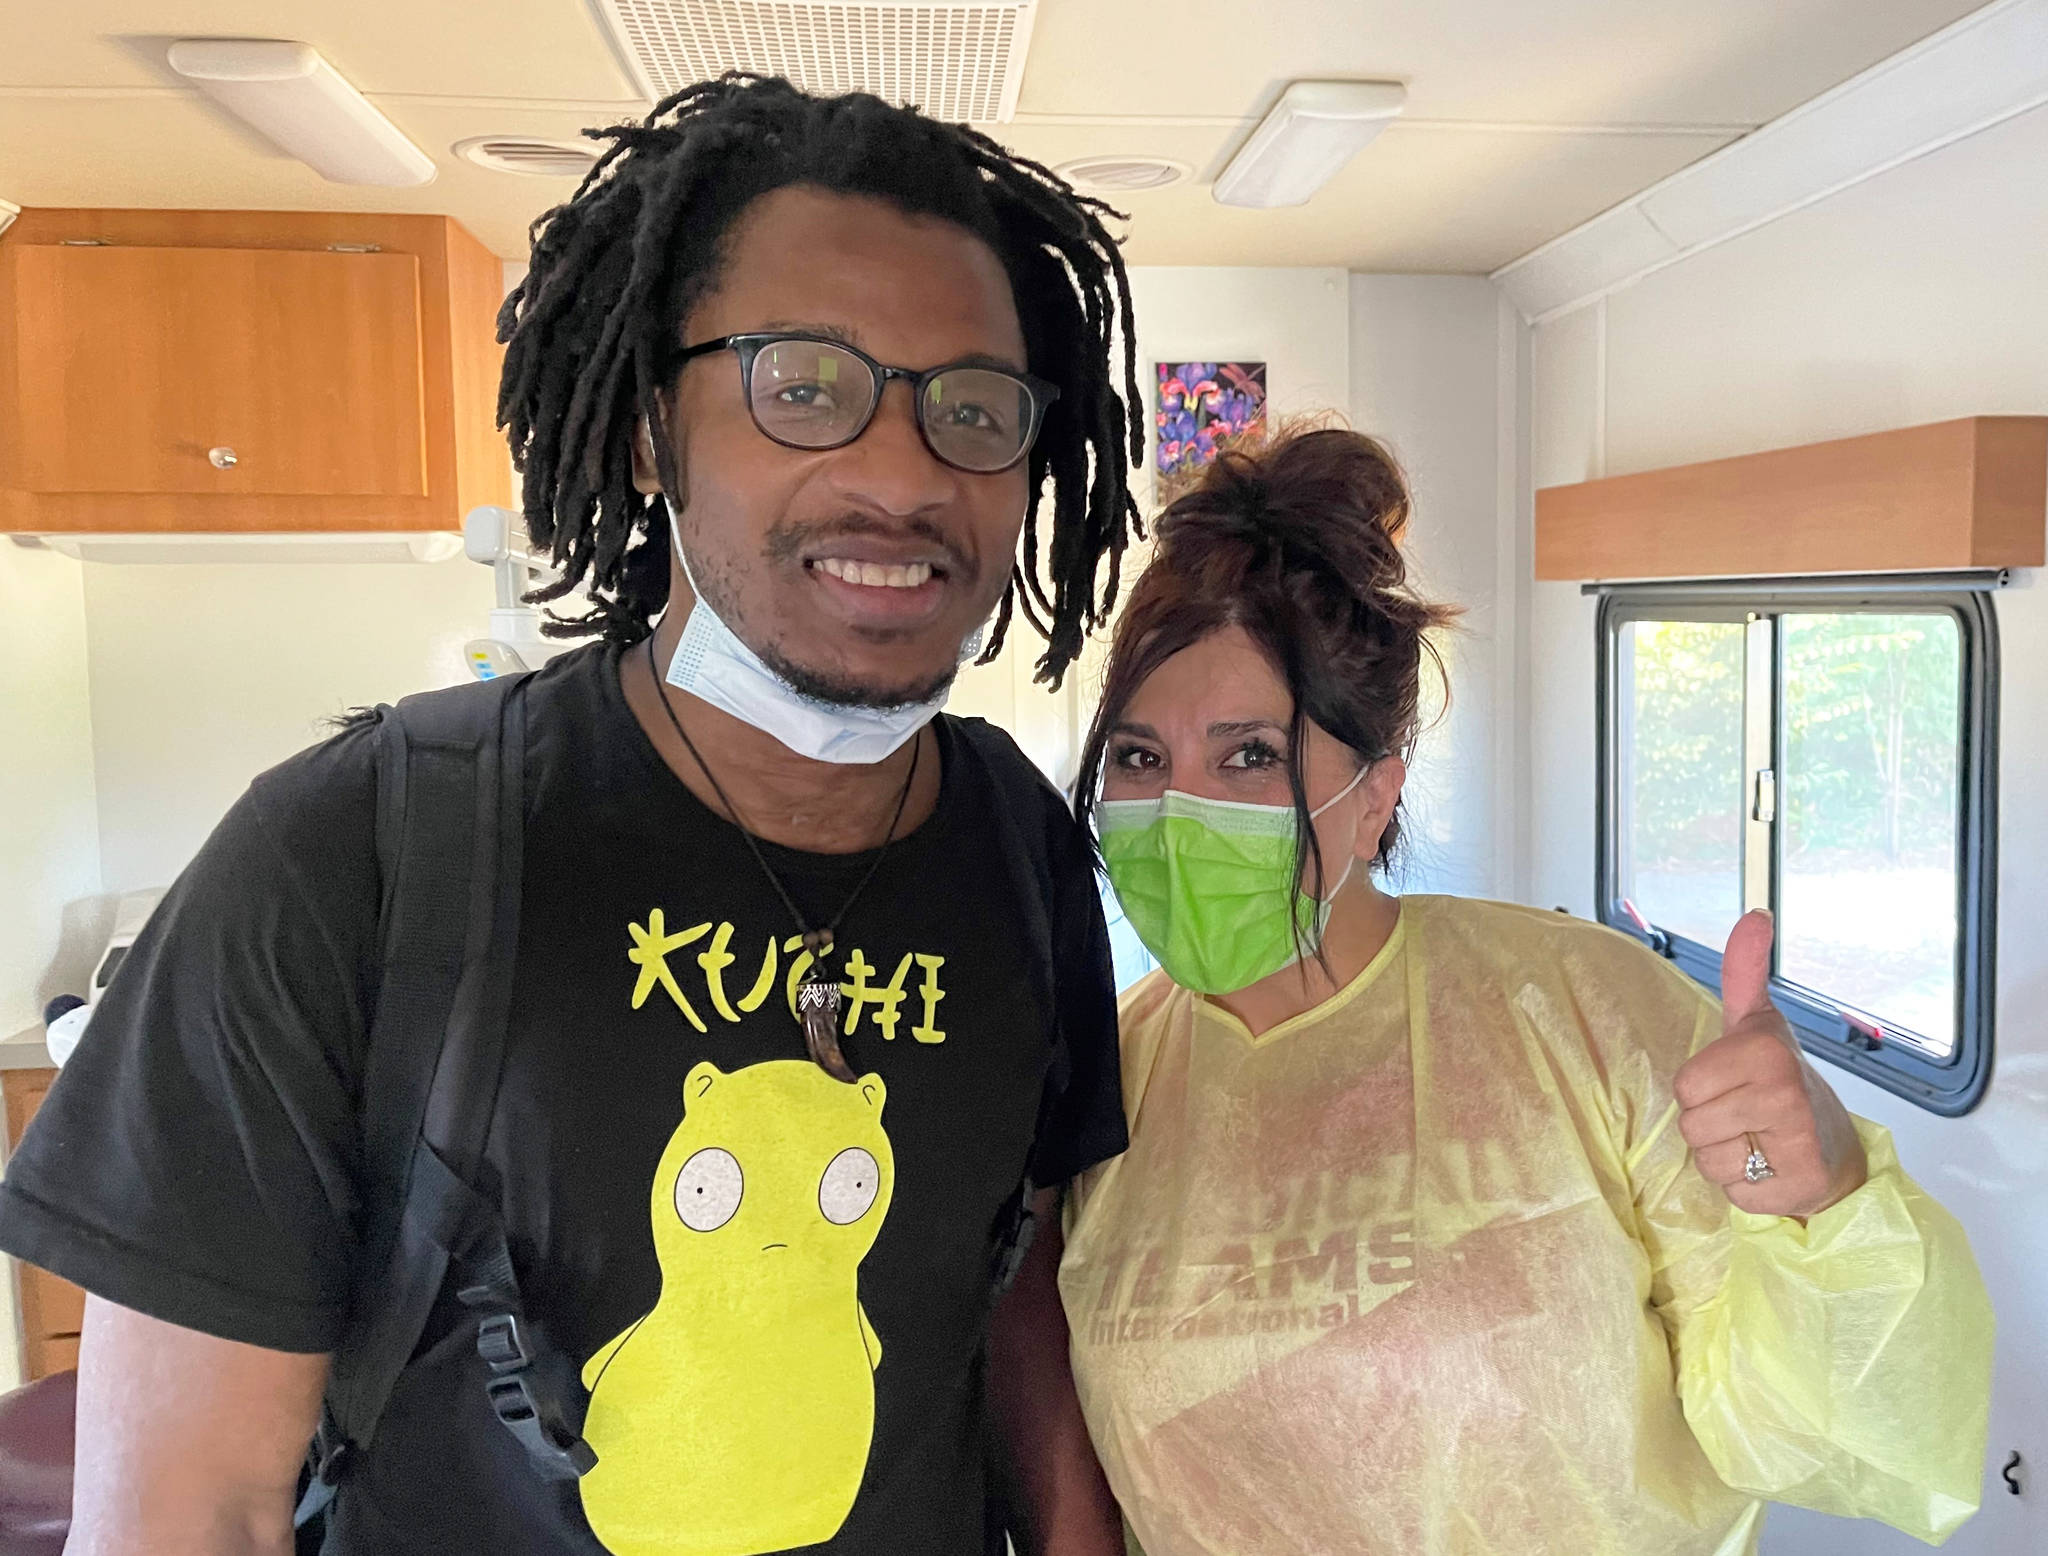 A homeless man shows off his new smile after receiving dental treatment at a free temporary clinic Aug. 6 in Kent. COURTESY PHOTO, Tubman Center